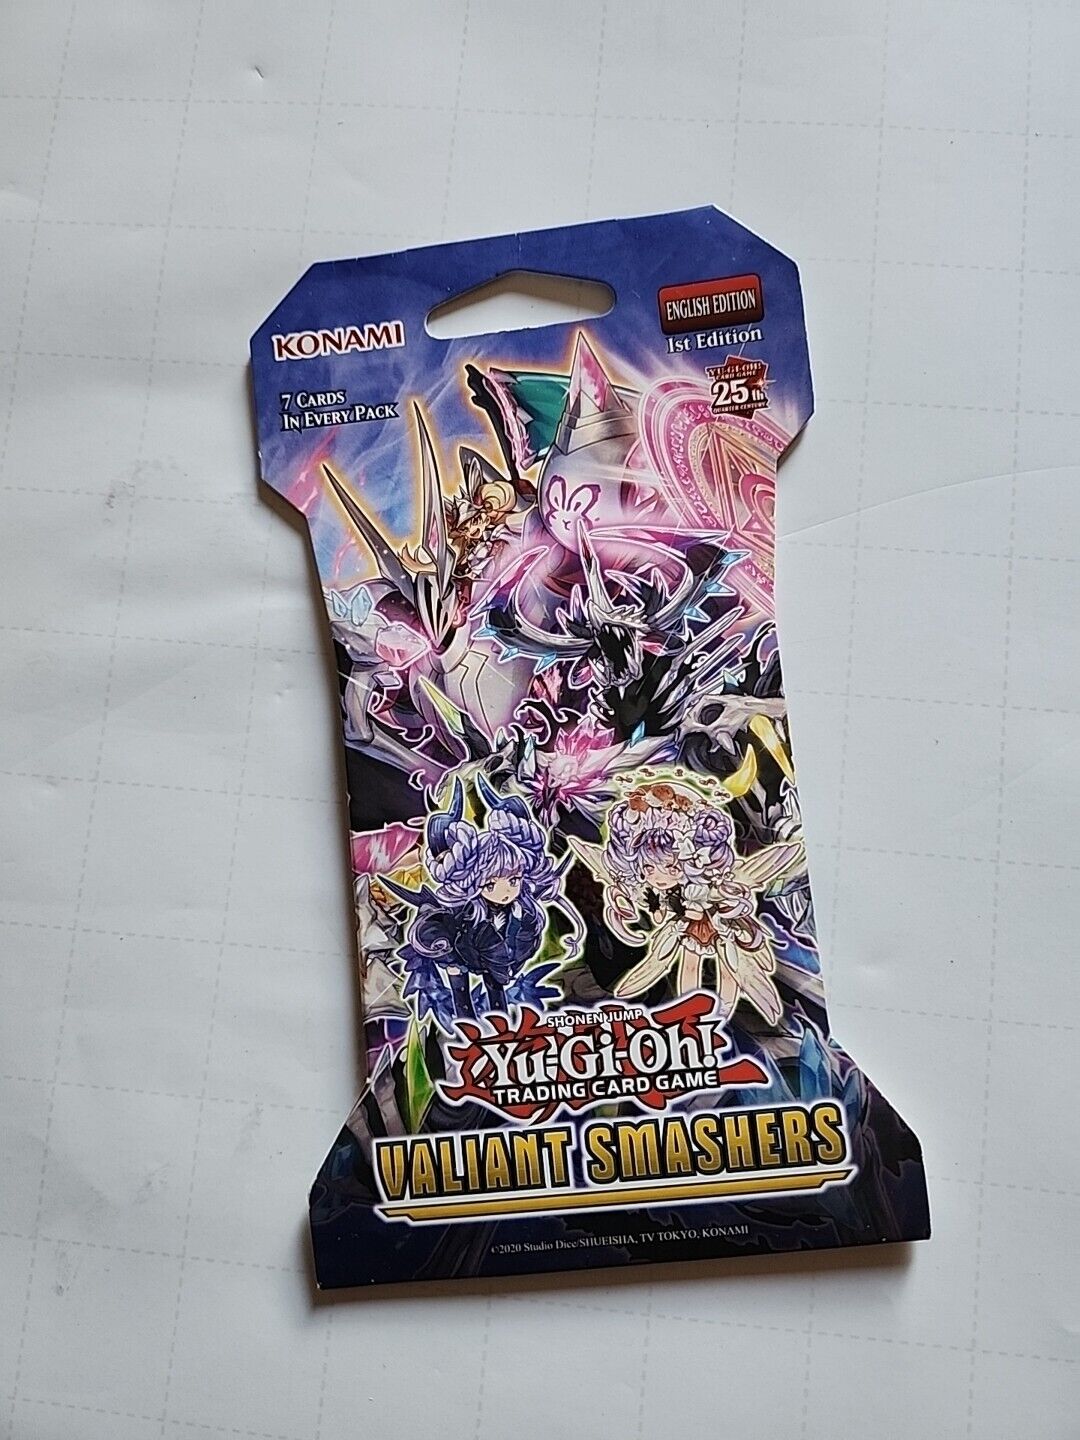 Yugioh Valiant🔴Smashers Booster Pack English 1st Edition 7 Cards/Pack